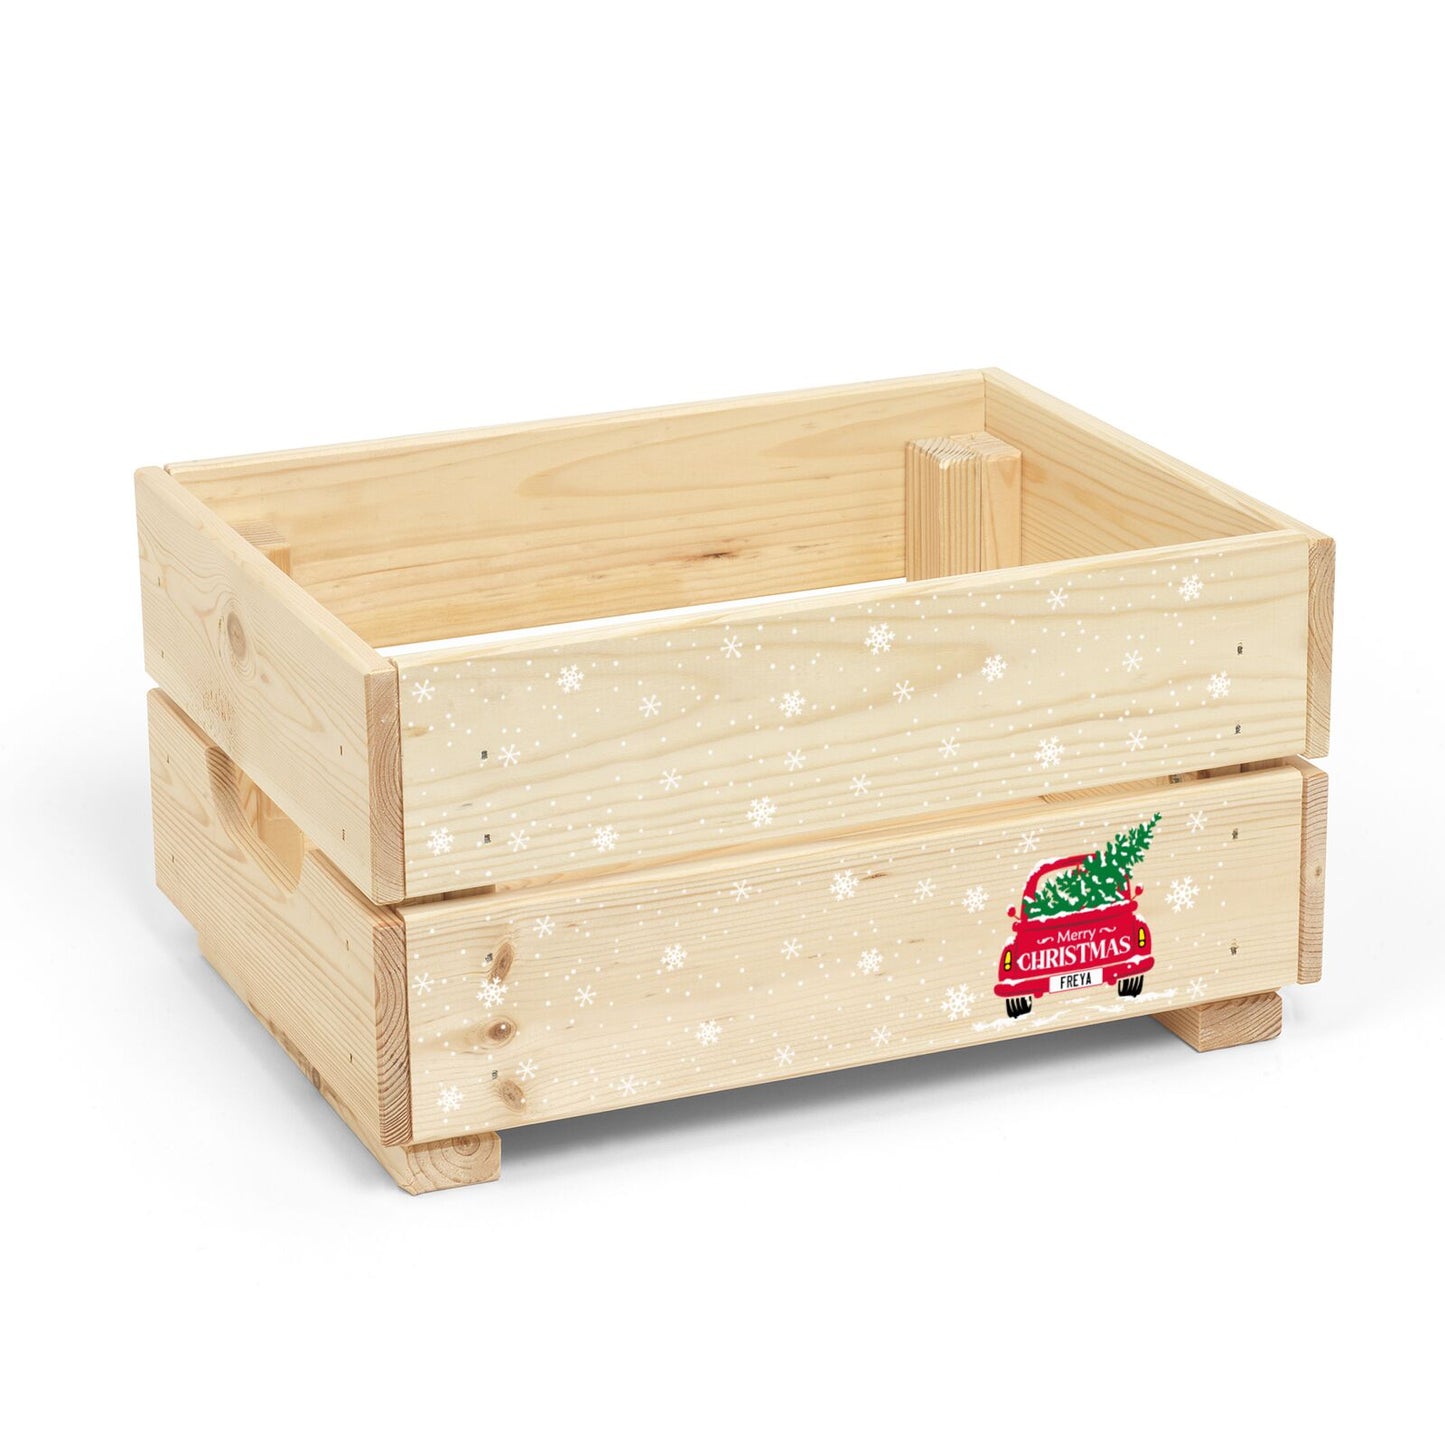 Personalised Driving Home For Christmas Christmas Eve Crate Box Side Angle